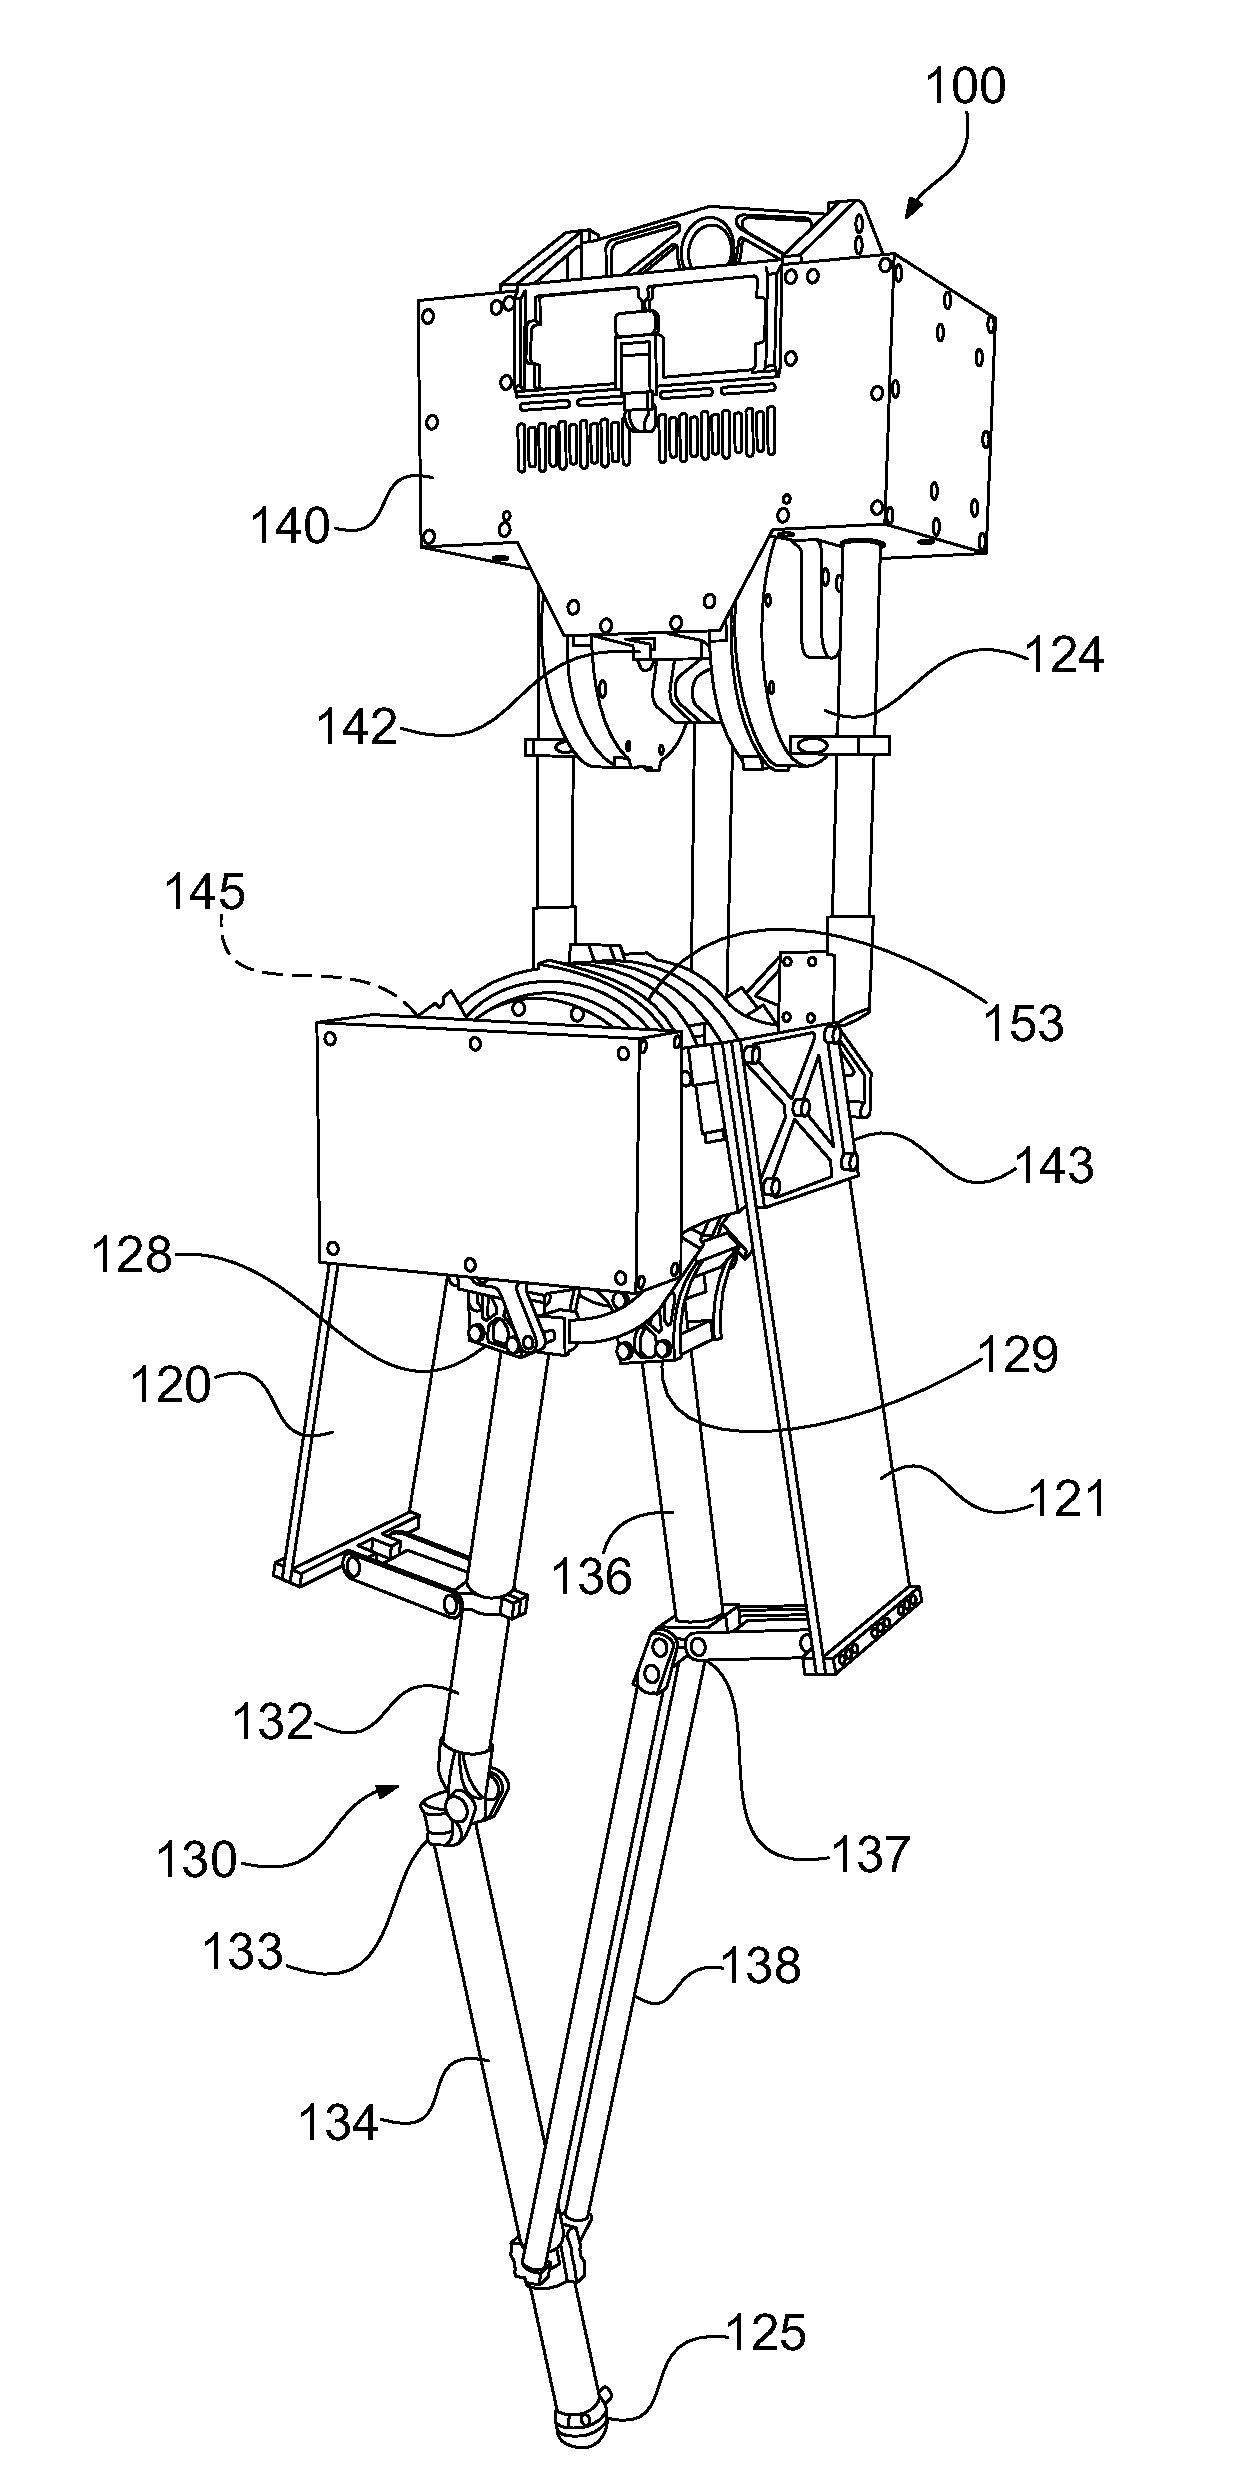 Apparatus and method for legged locomotion integrating passive dynamics with active force control